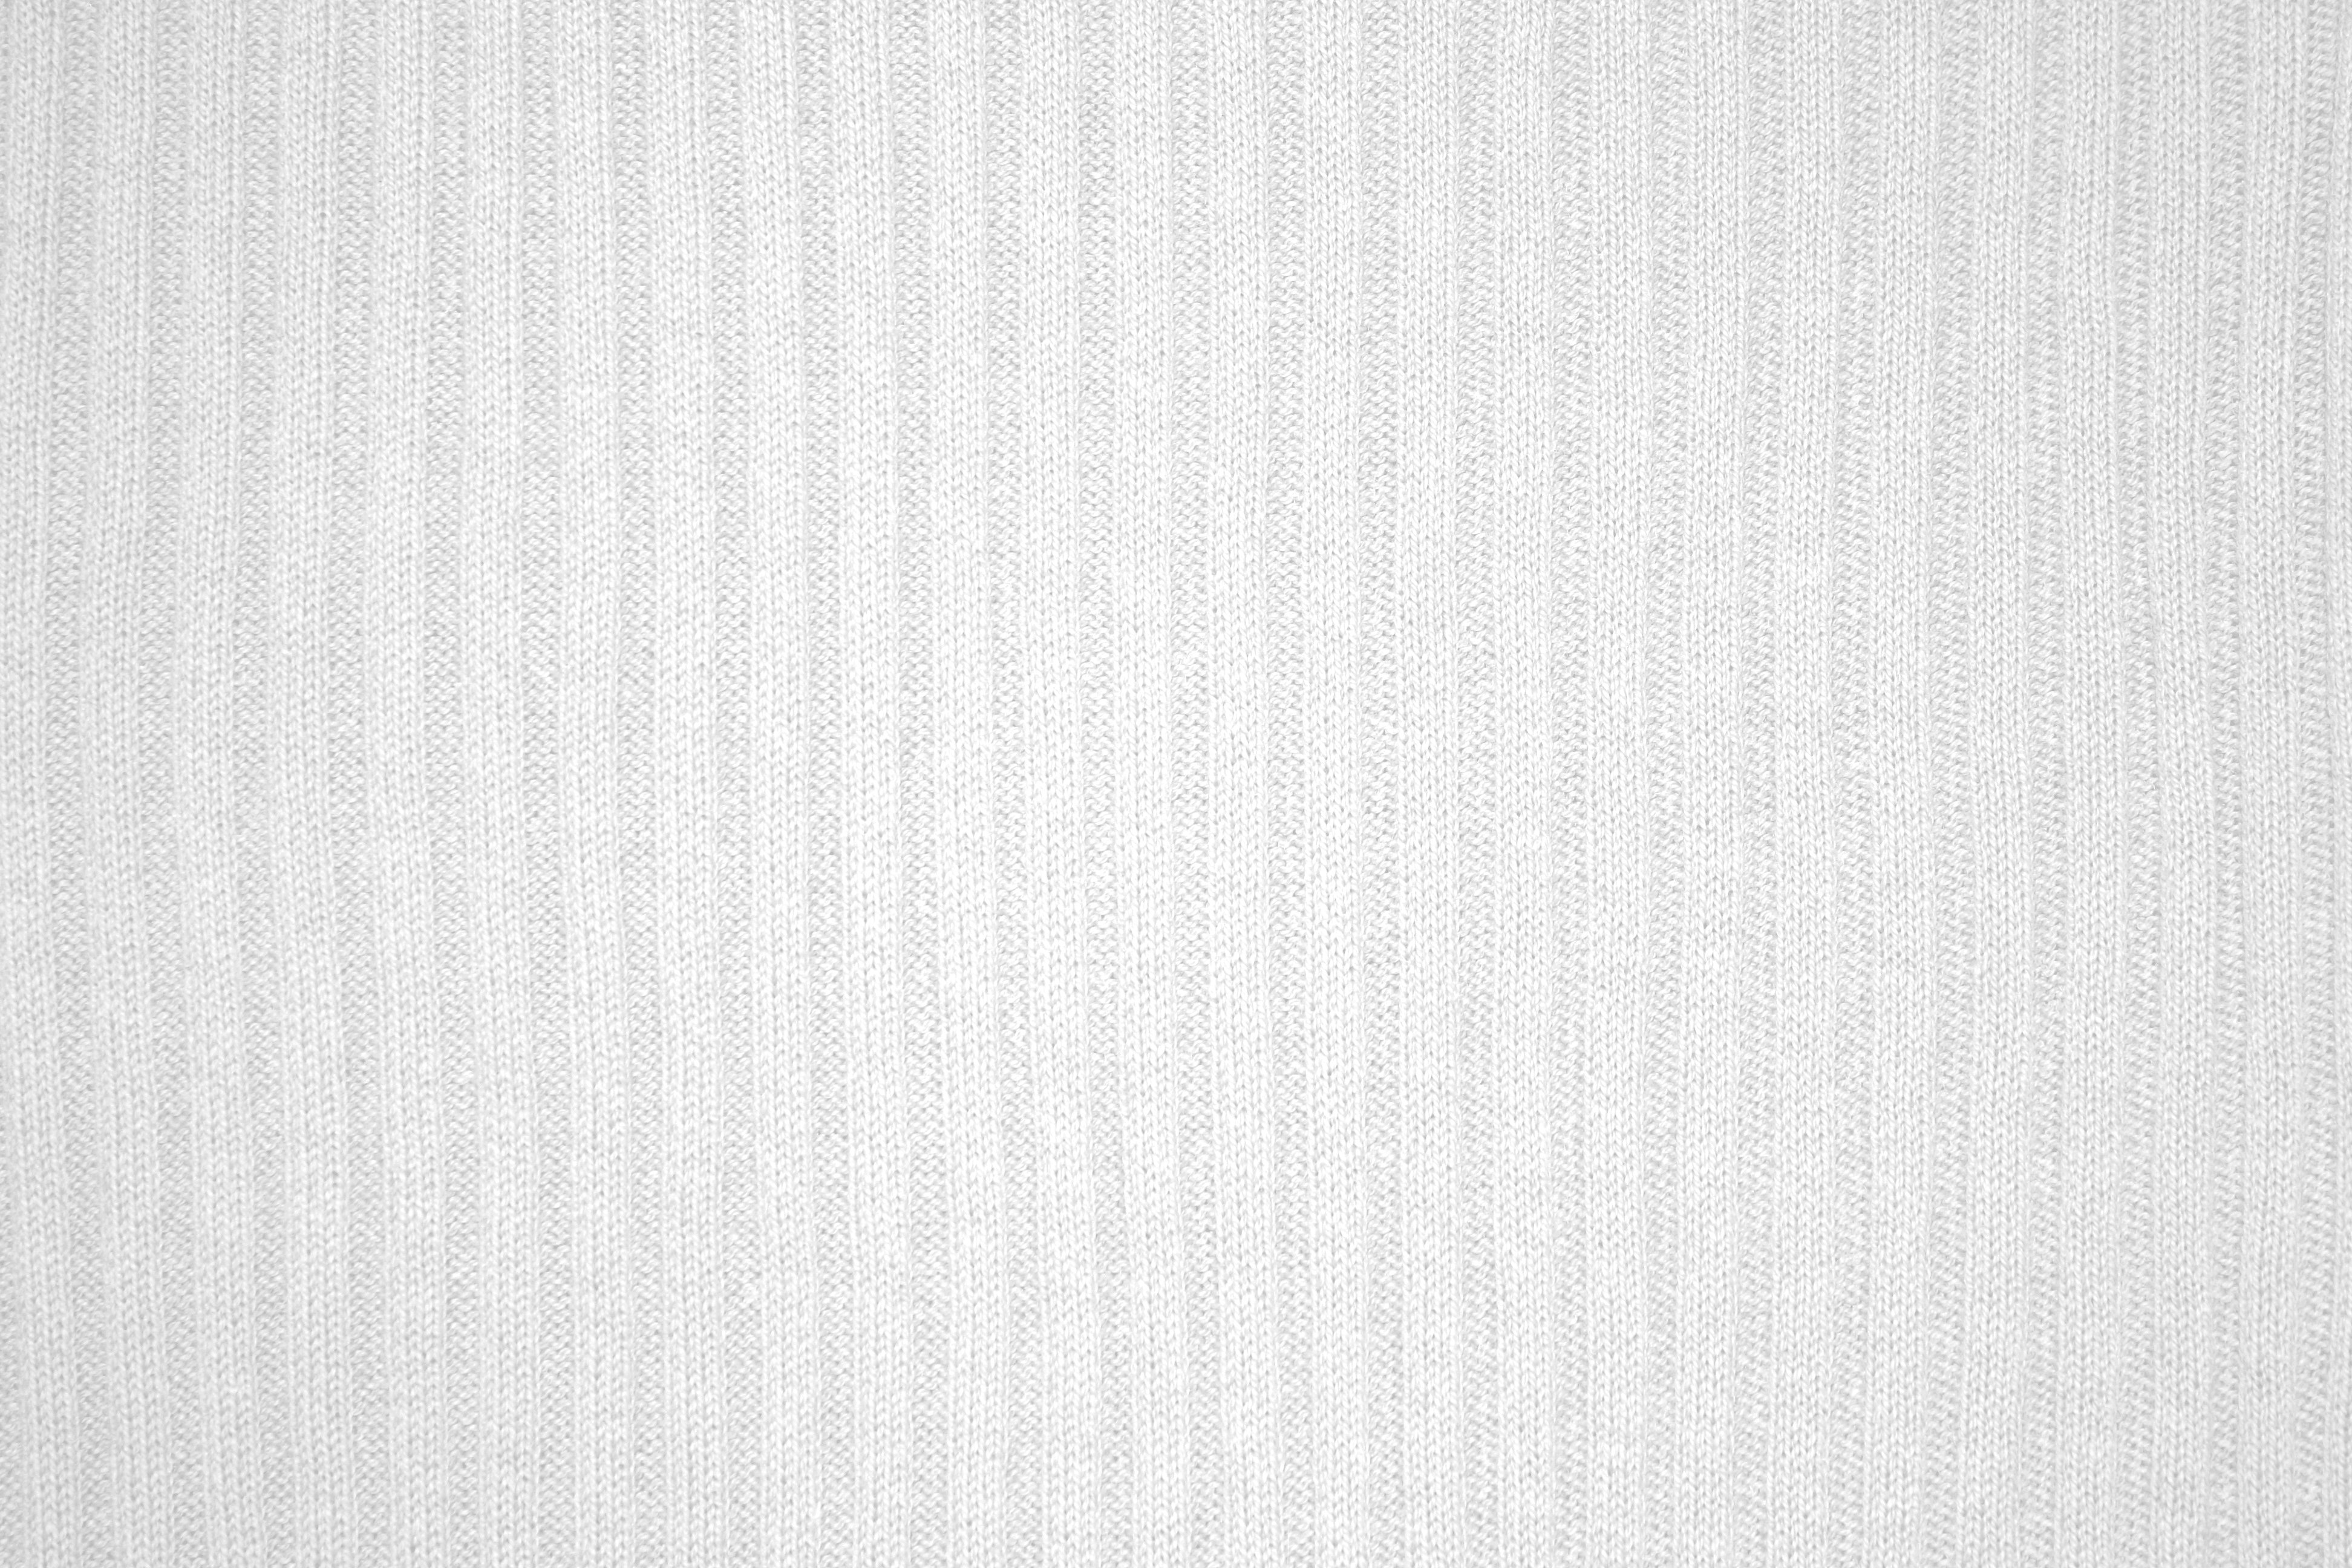 White Ribbed Knit Fabric Texture Picture Free Photograph Photos